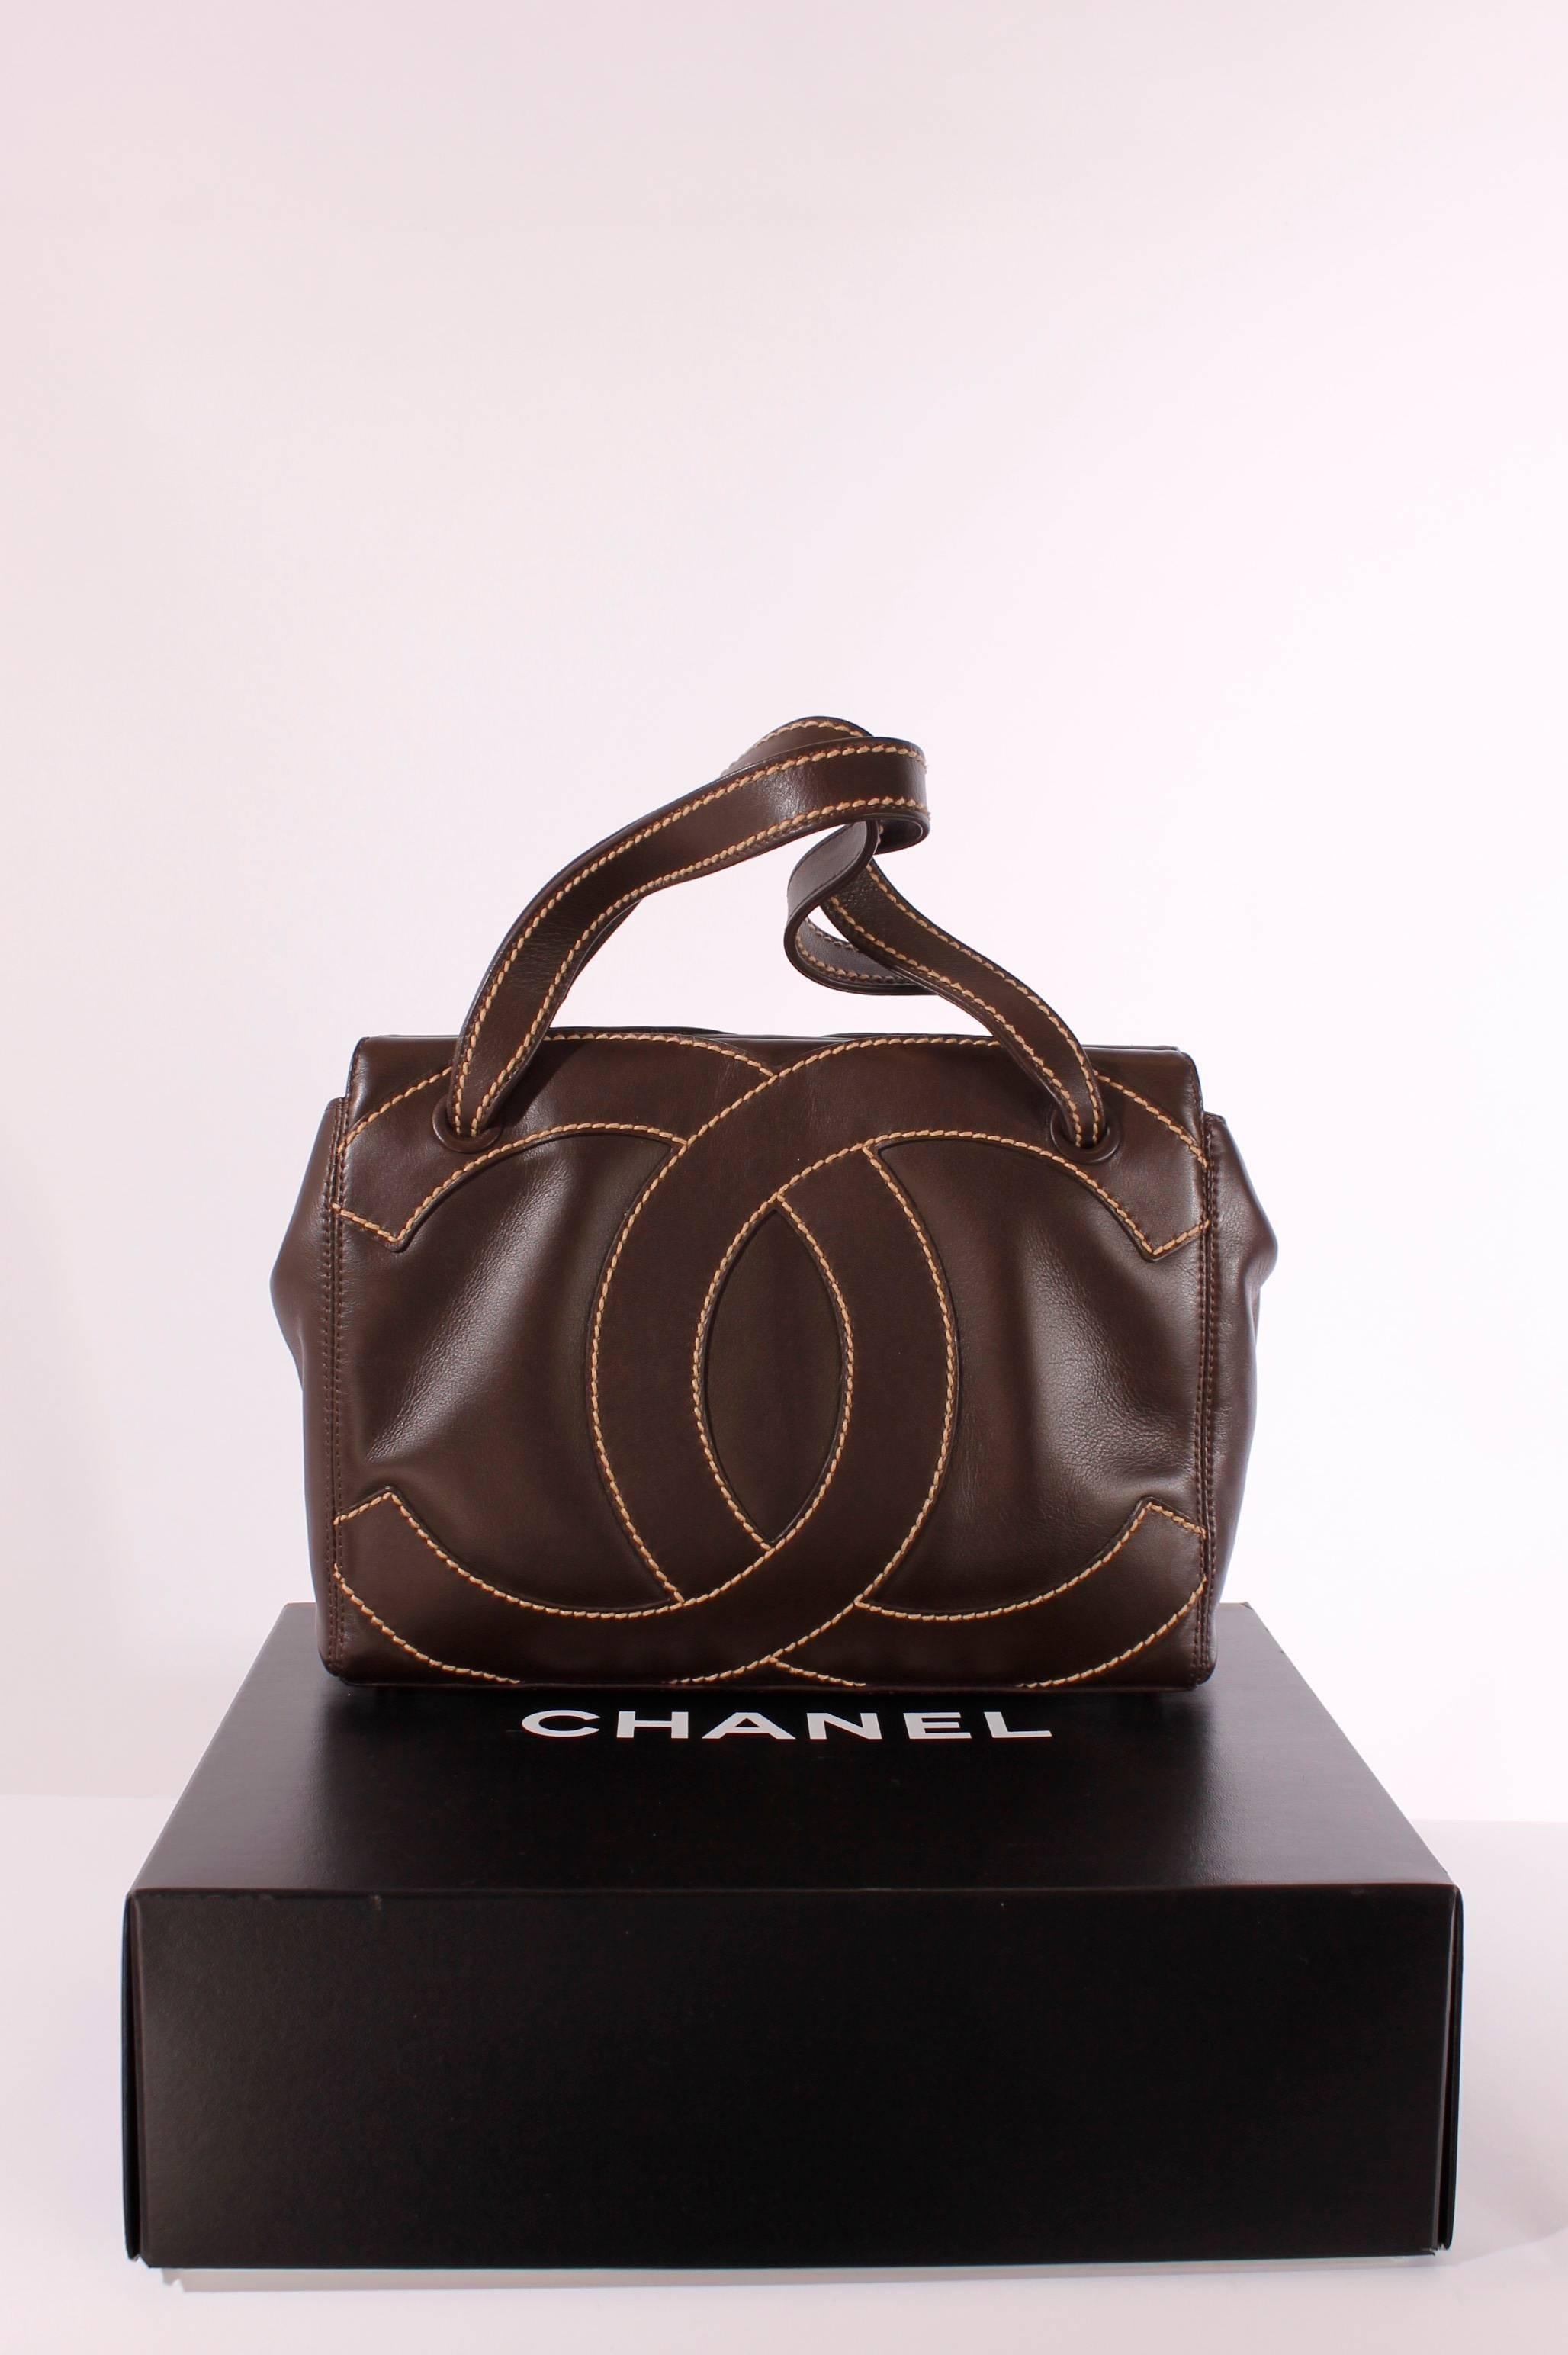 This medium shopper from 2005 is made by Chanel in a wonderfull shade of darkbrown.

Made of firm leather with an extra large CC-logo stitched on on both sides. Stitching in off-white. This stitching is also used on the handles of this bag,